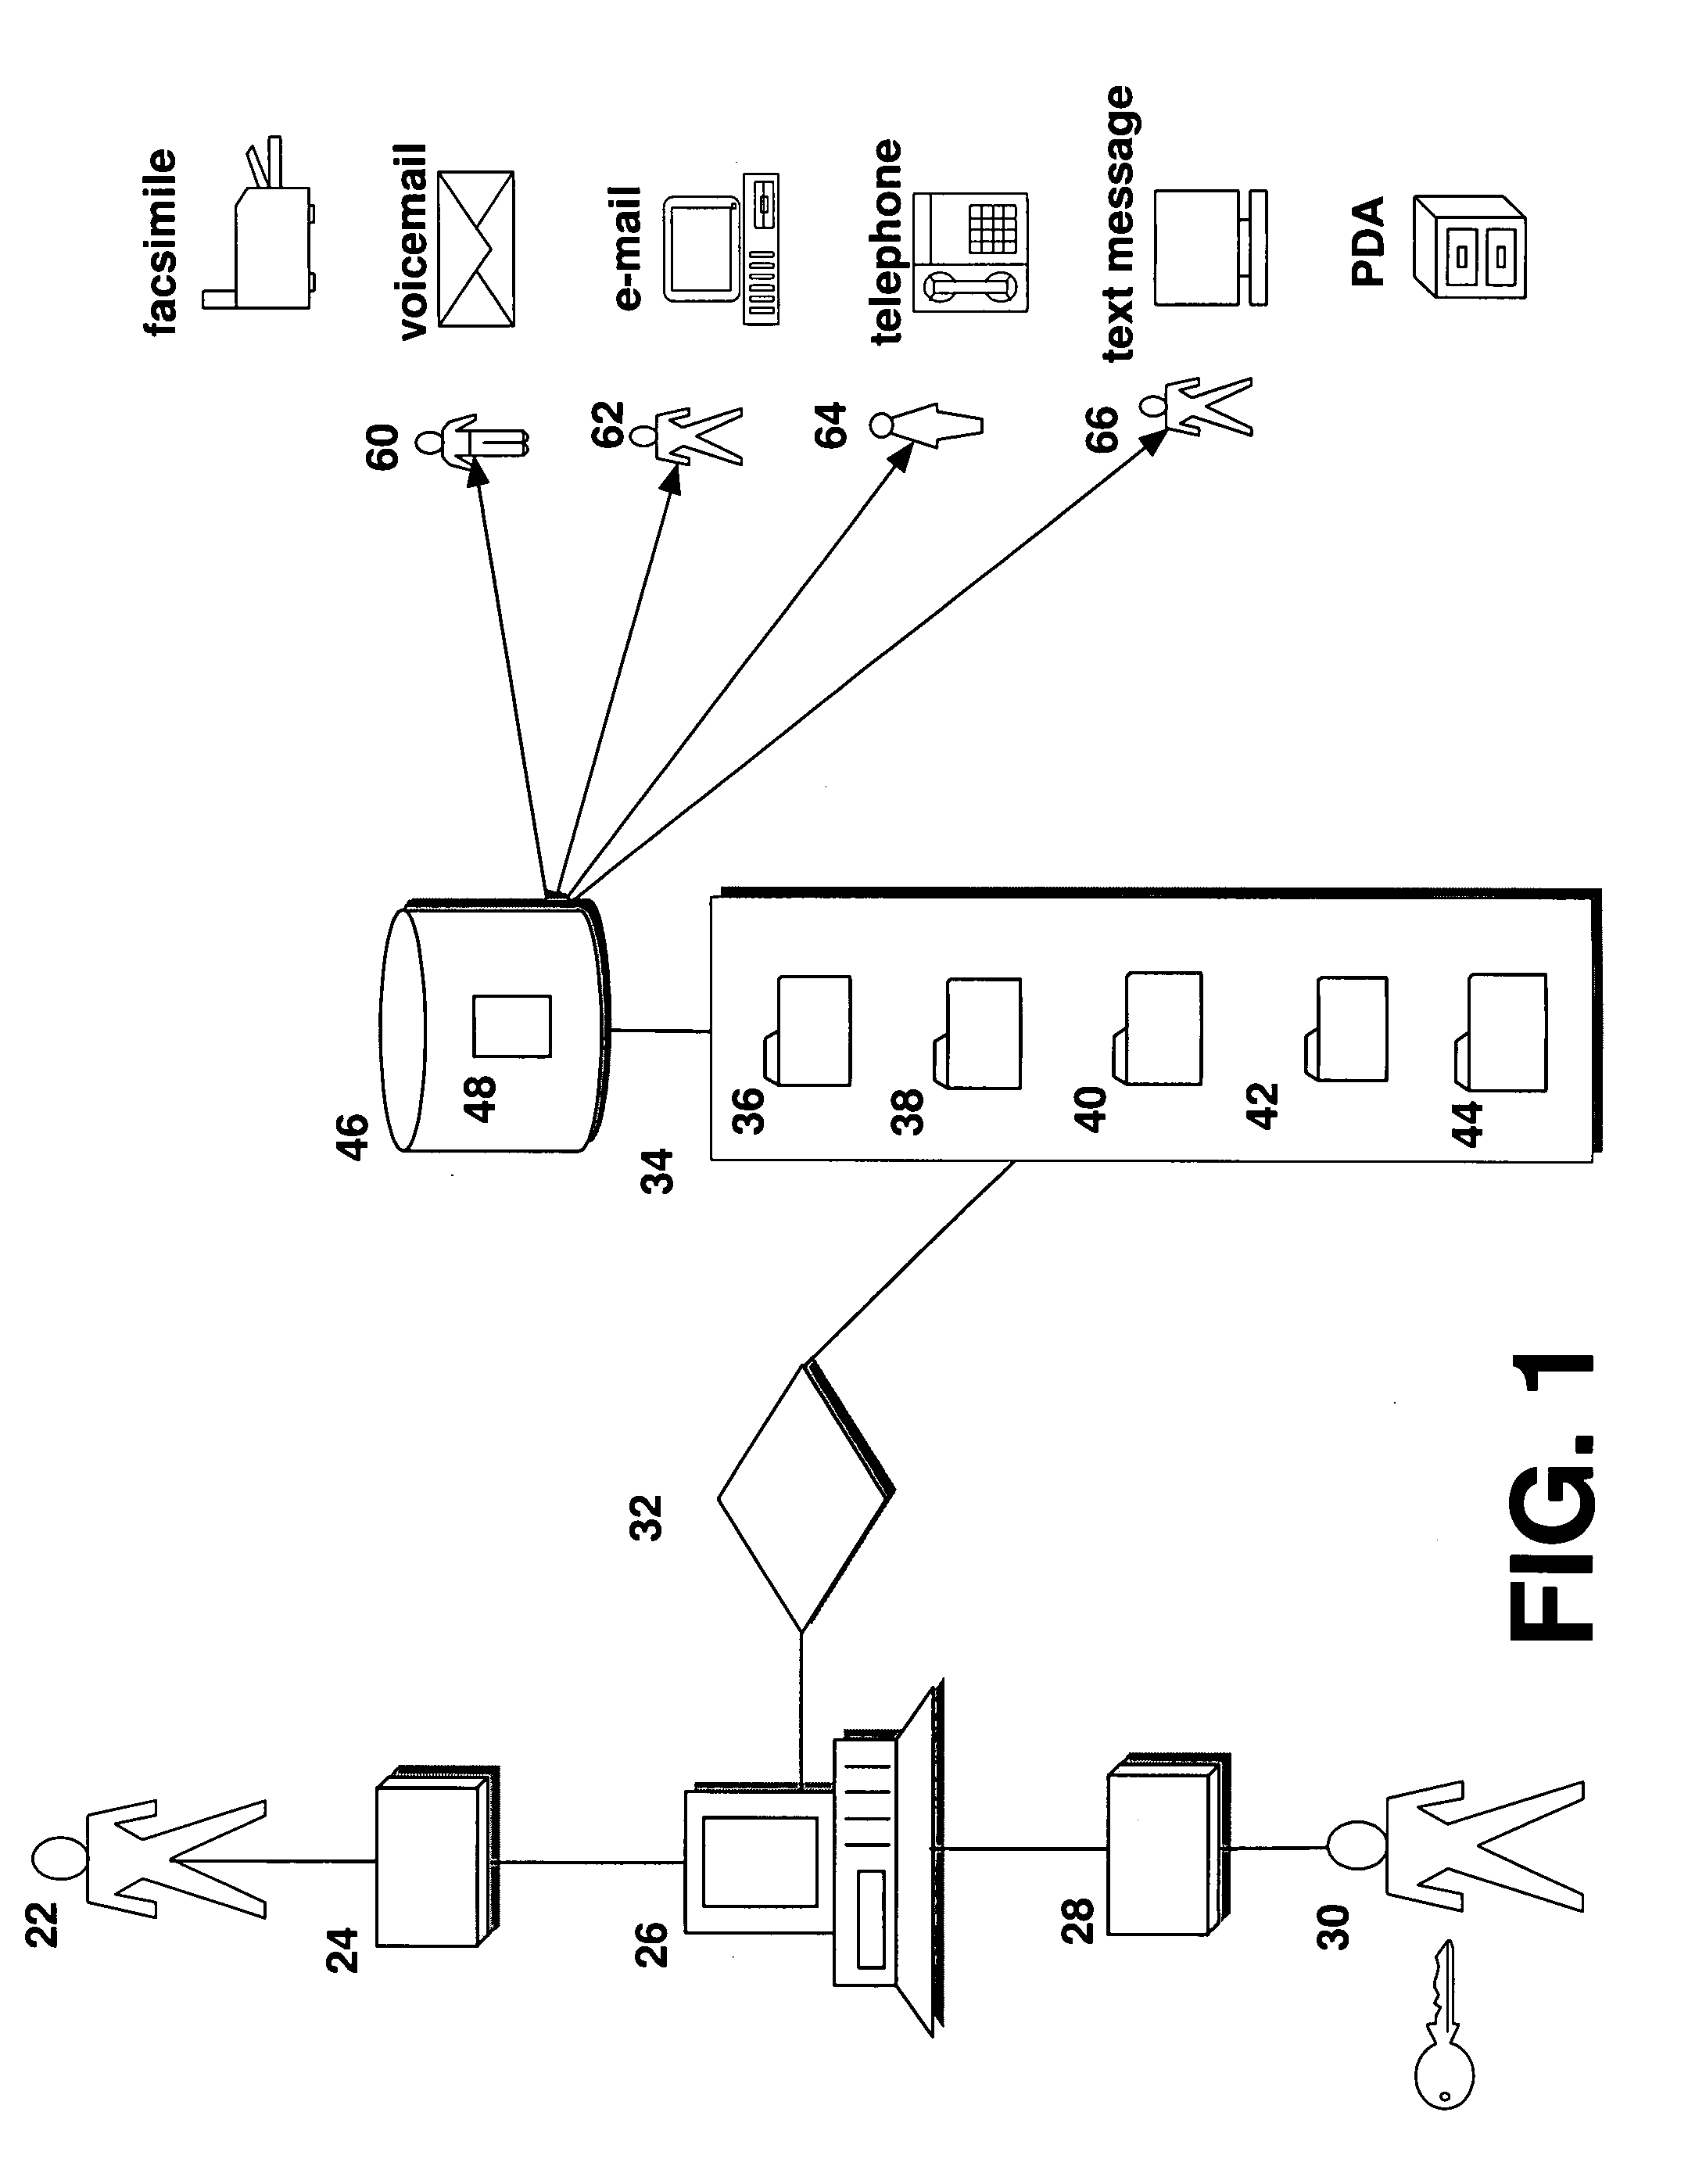 System and method for throttling mass notifications